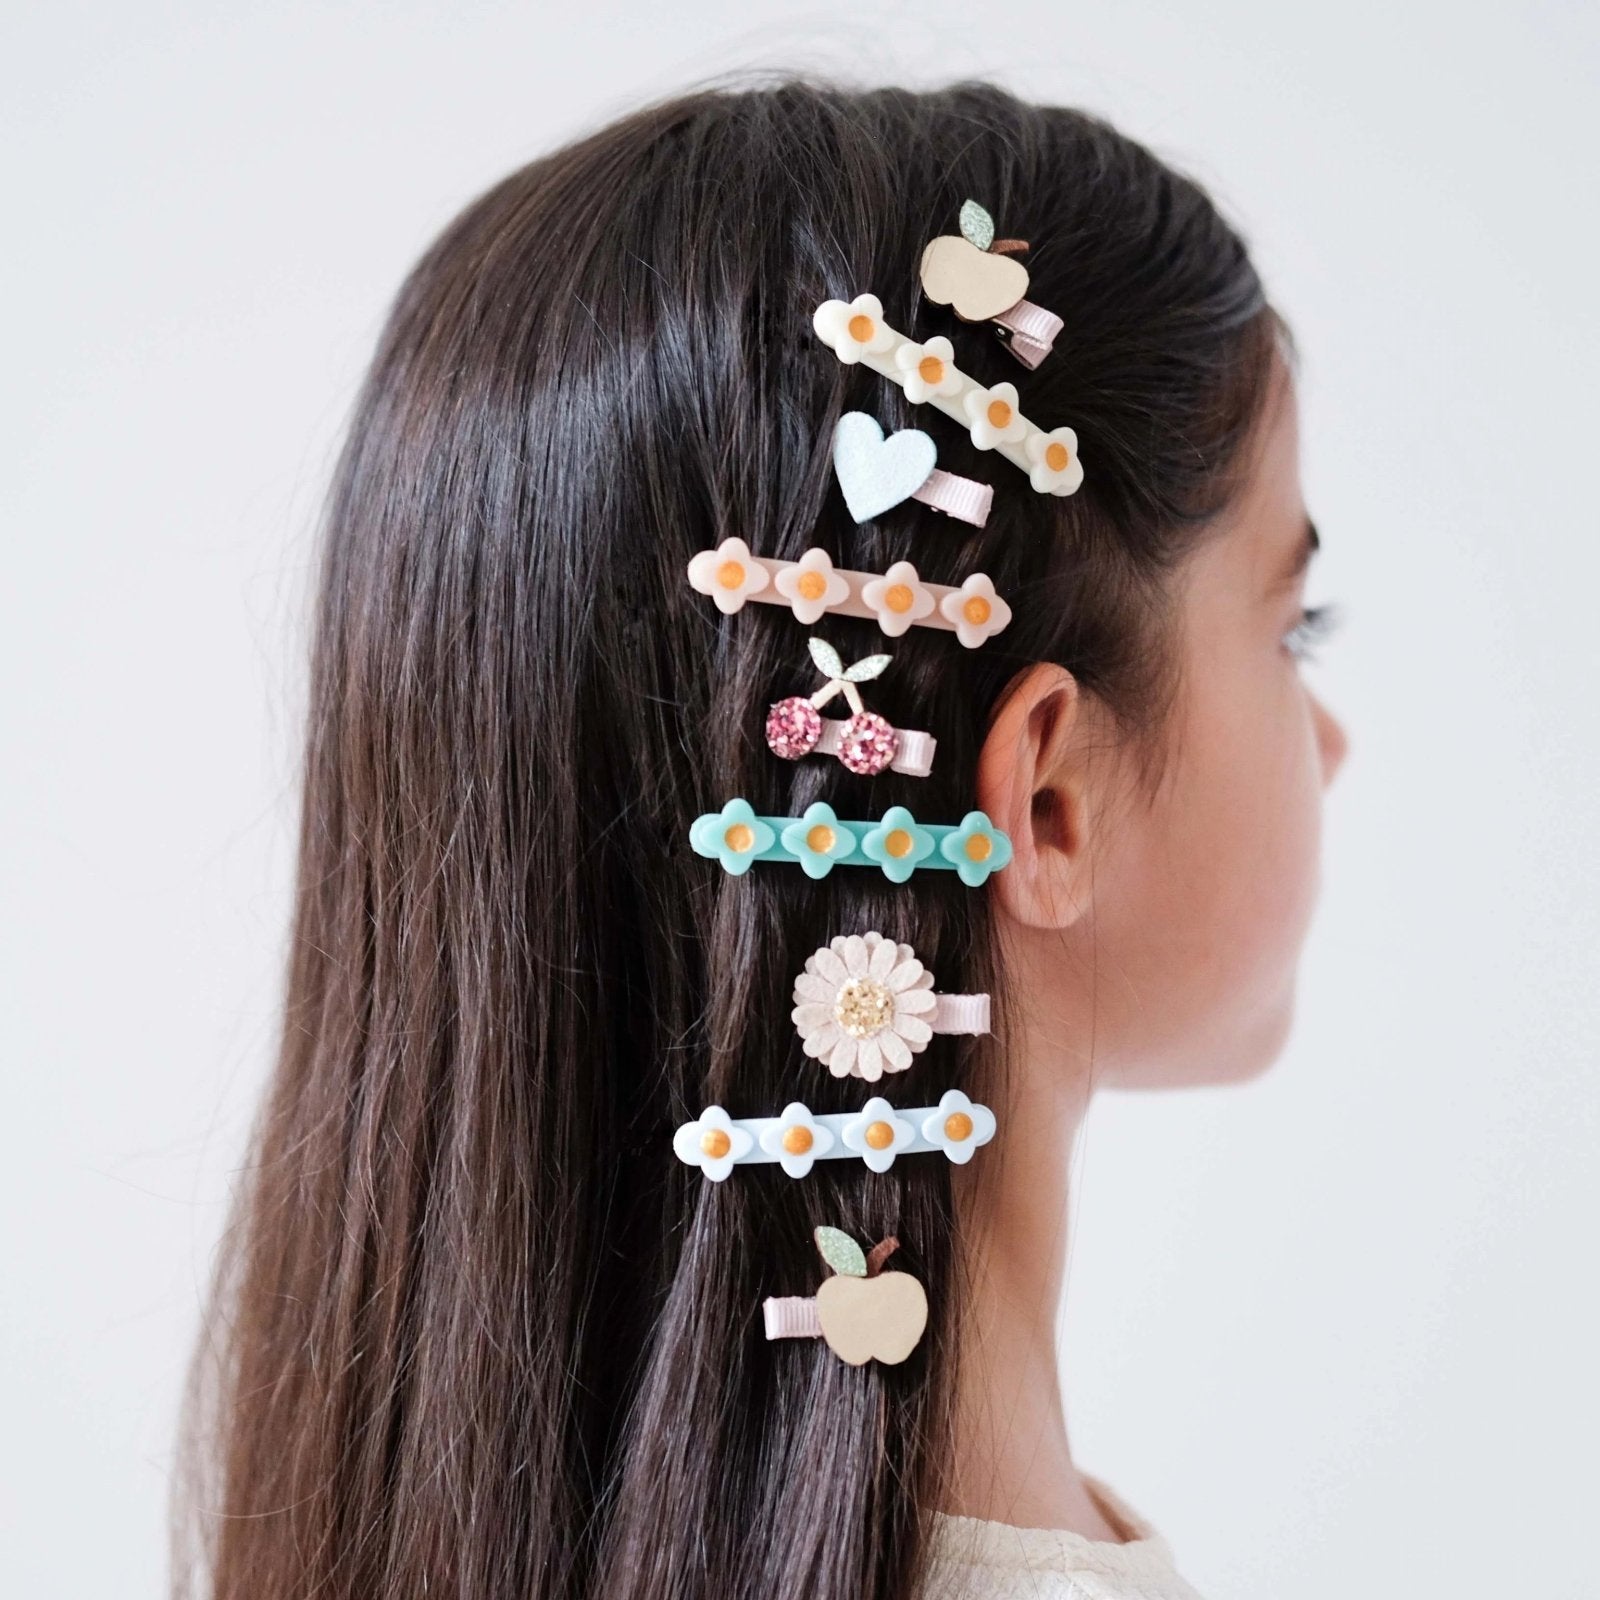 Mini Orchard Clips find Stylish Fashion for Little People- at Little Foxx Concept Store